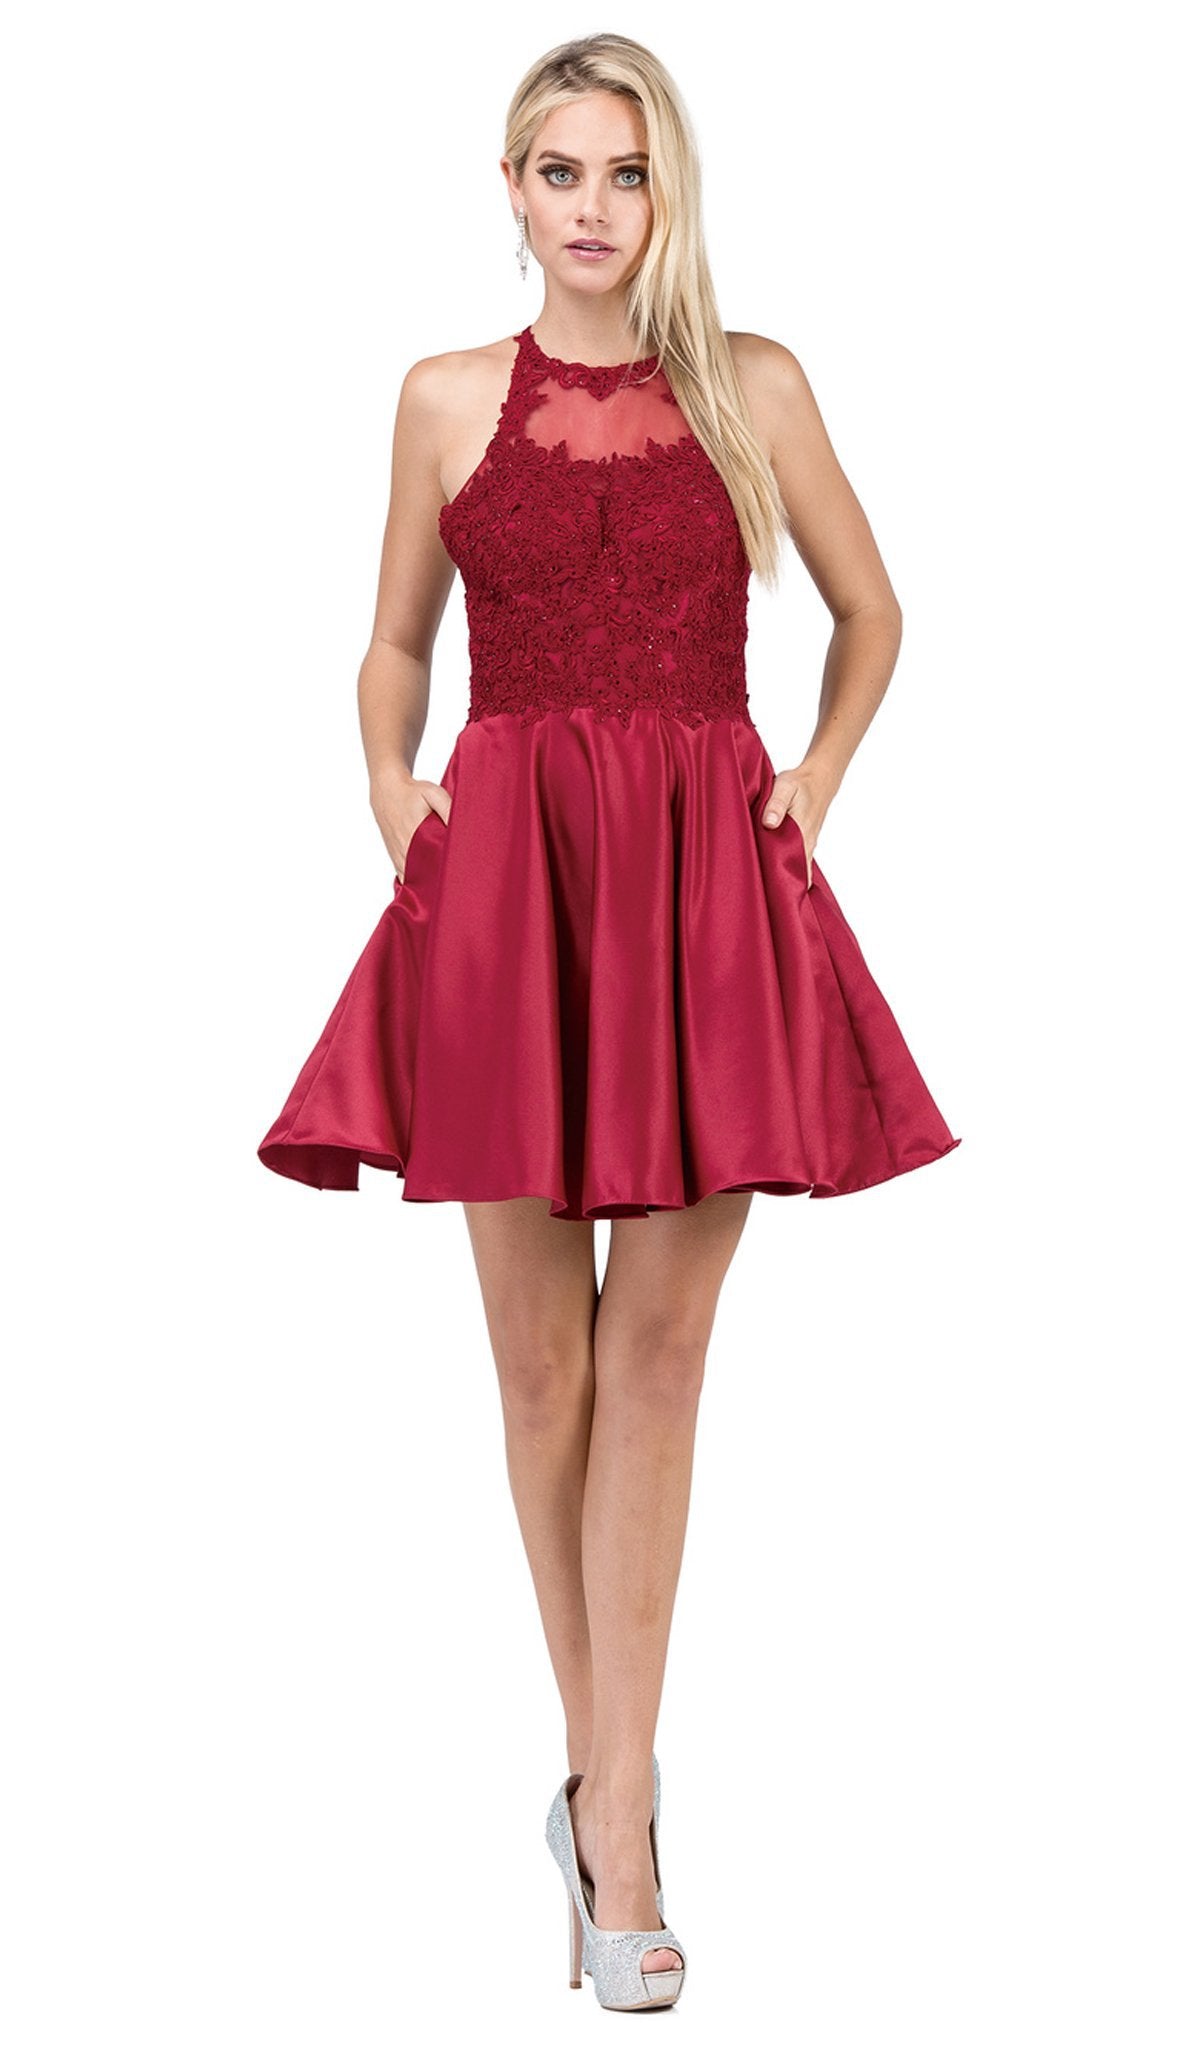 Image of Dancing Queen - 3028 Halter A-Line Homecoming Cocktail Dress